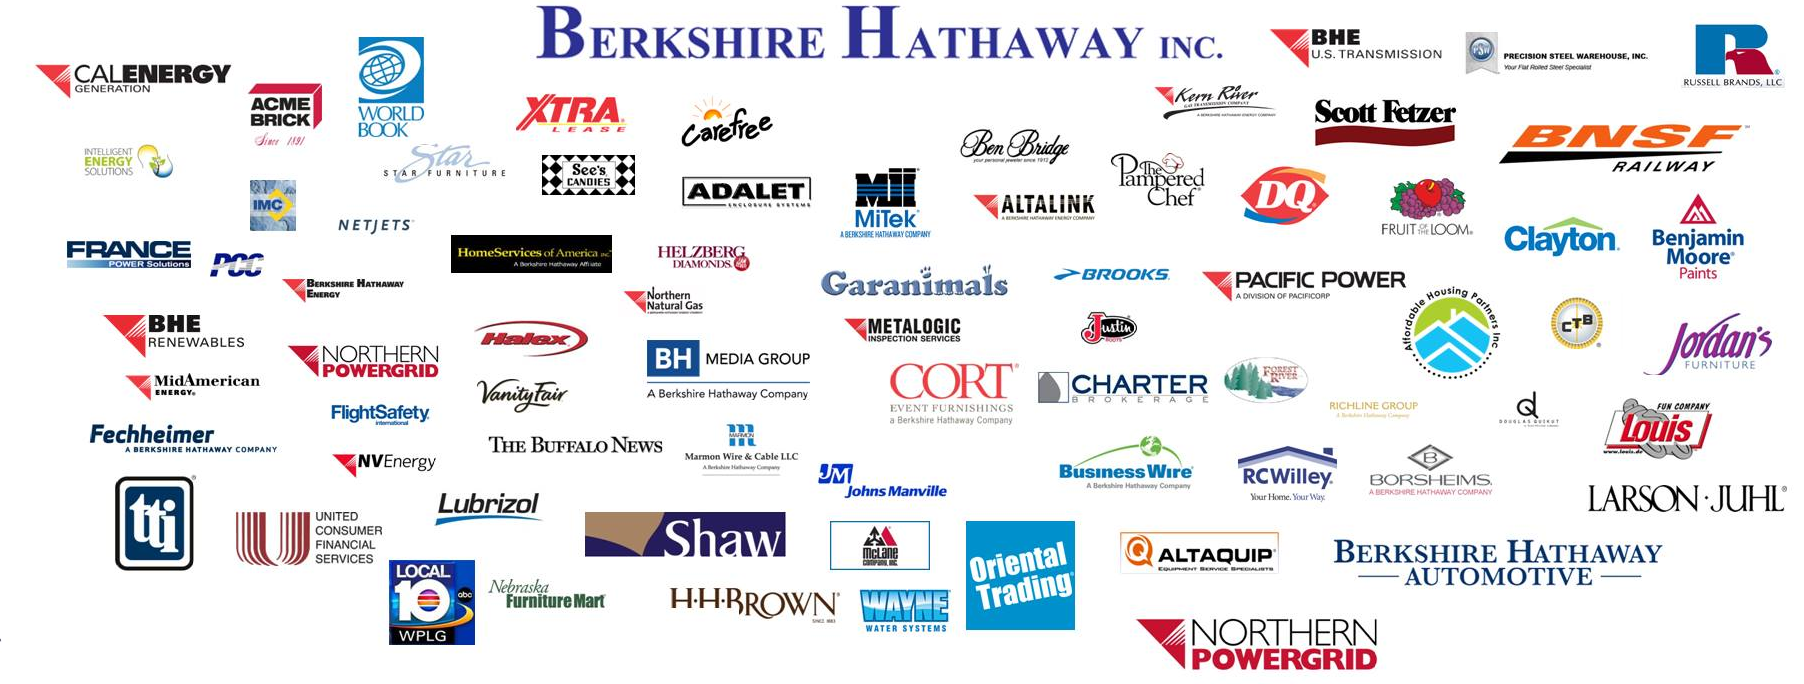 Illustration of the corporate logos of all companies of the holding company Berkshire Hathaway